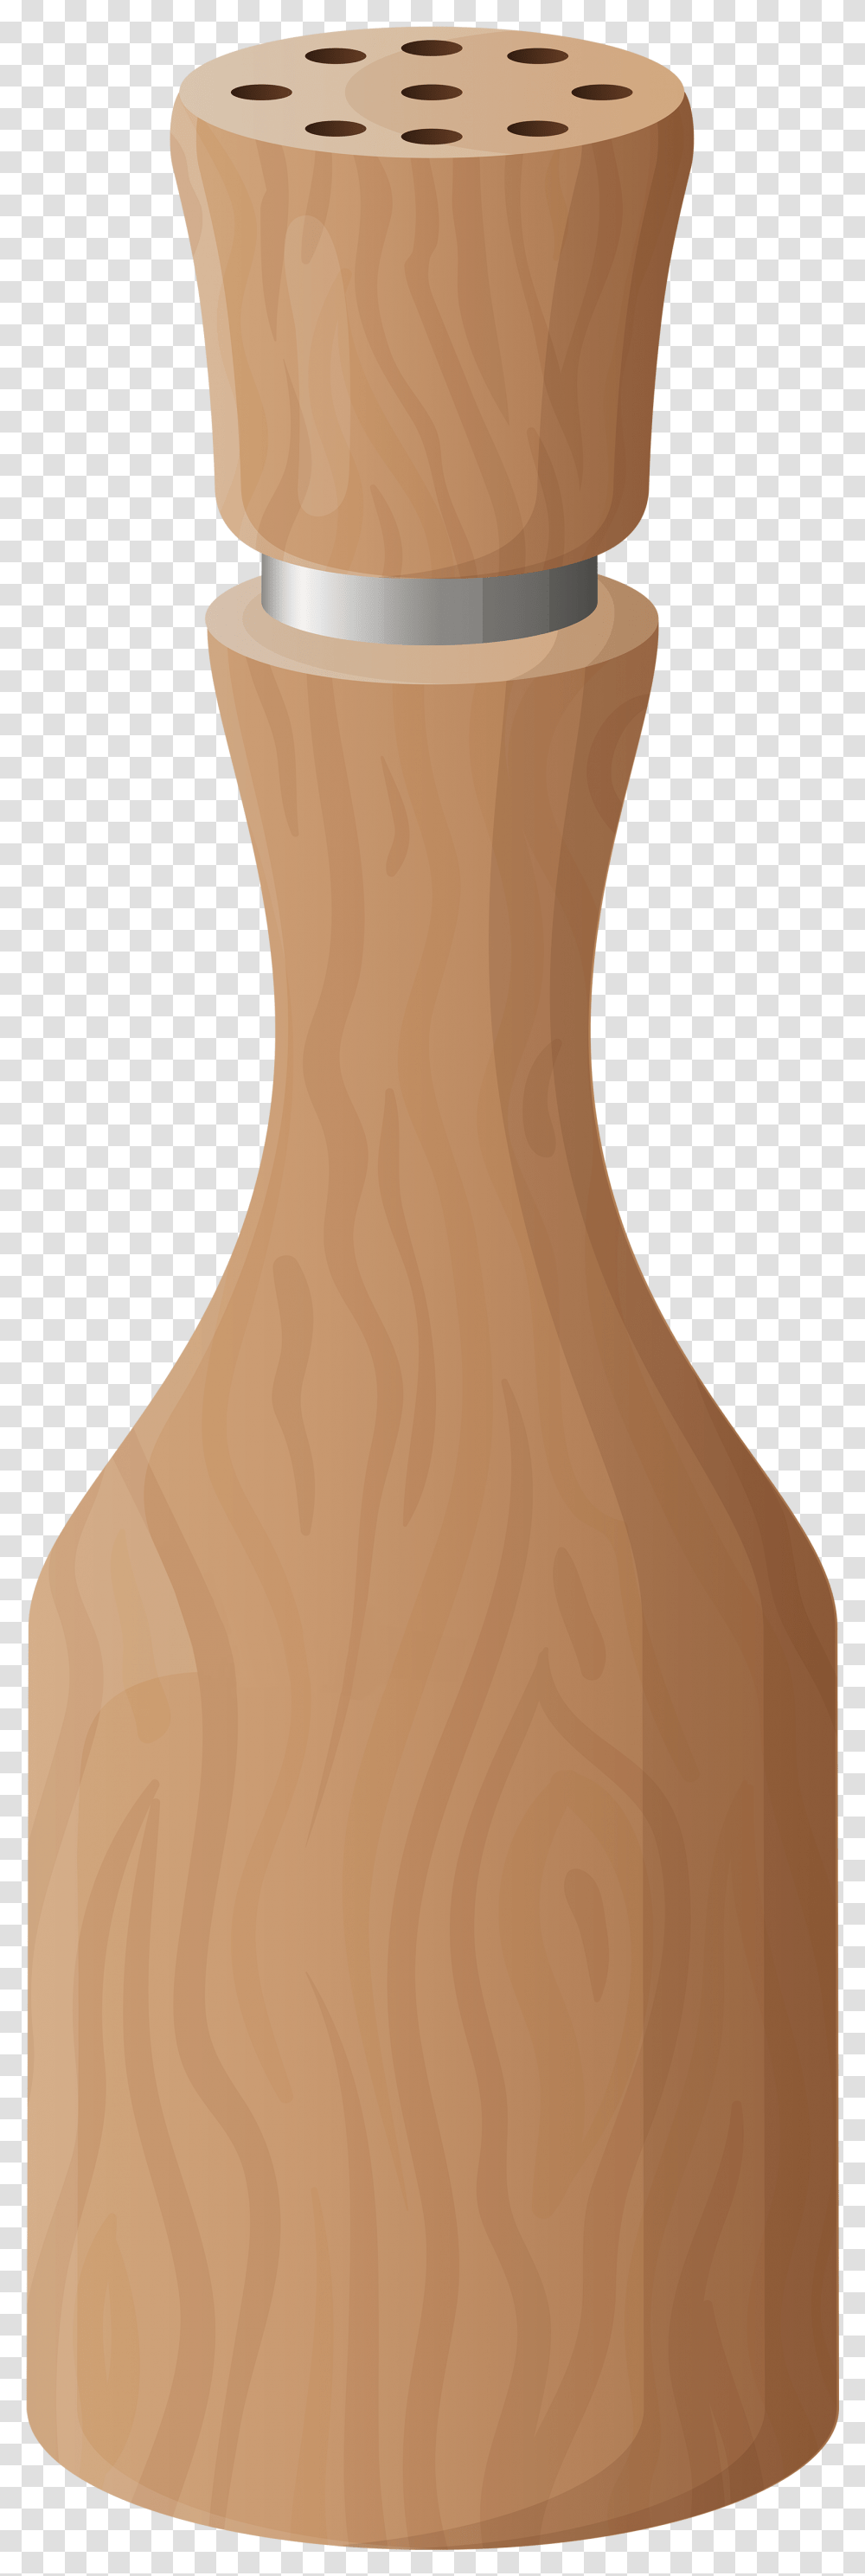 Pepper MillTitle Pepper Mill Peppermill, Plant, Produce, Food, Vegetable Transparent Png